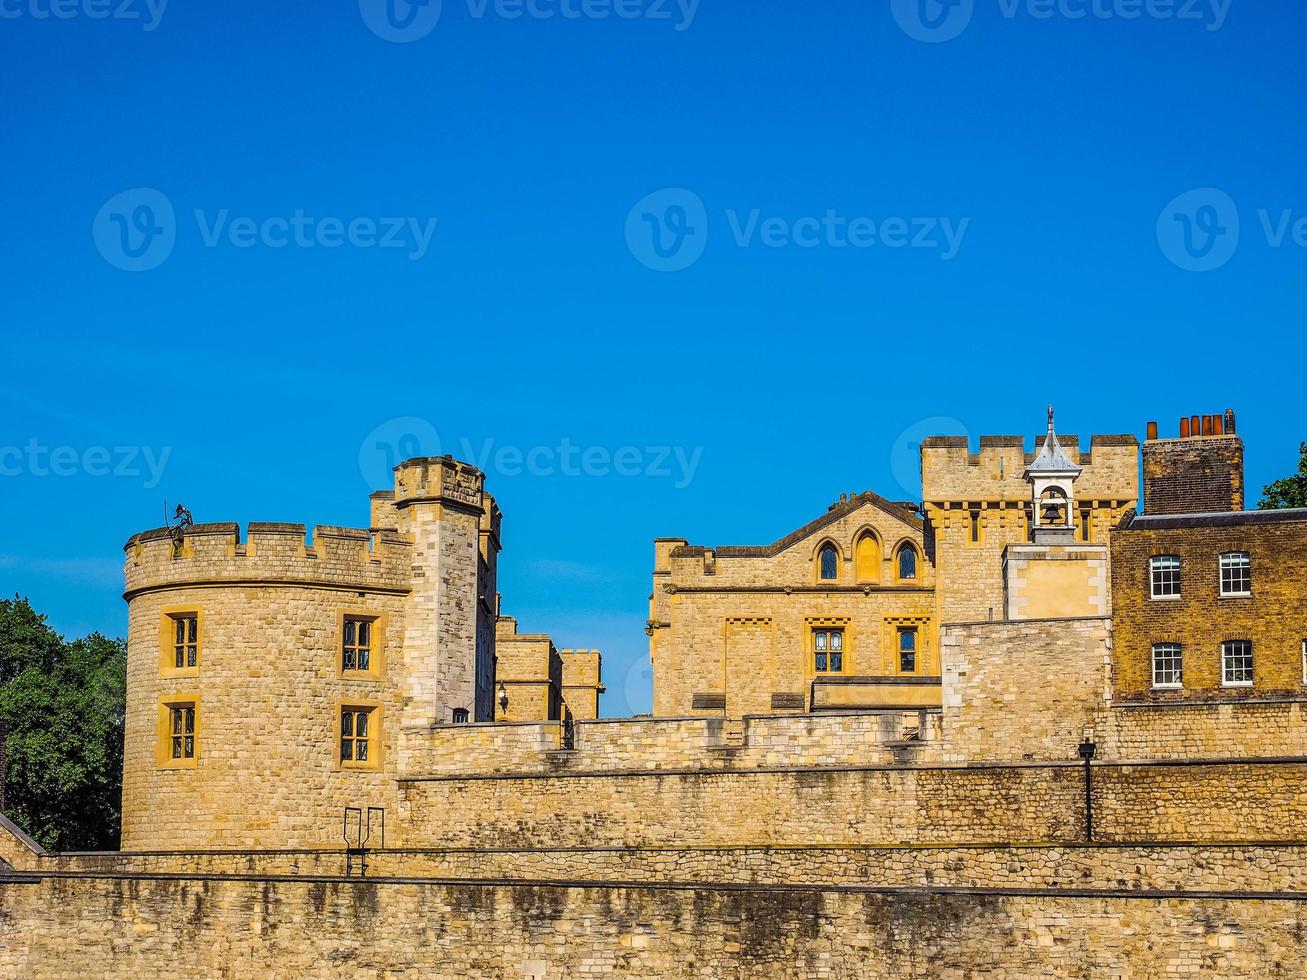 HDR Tower of London photo